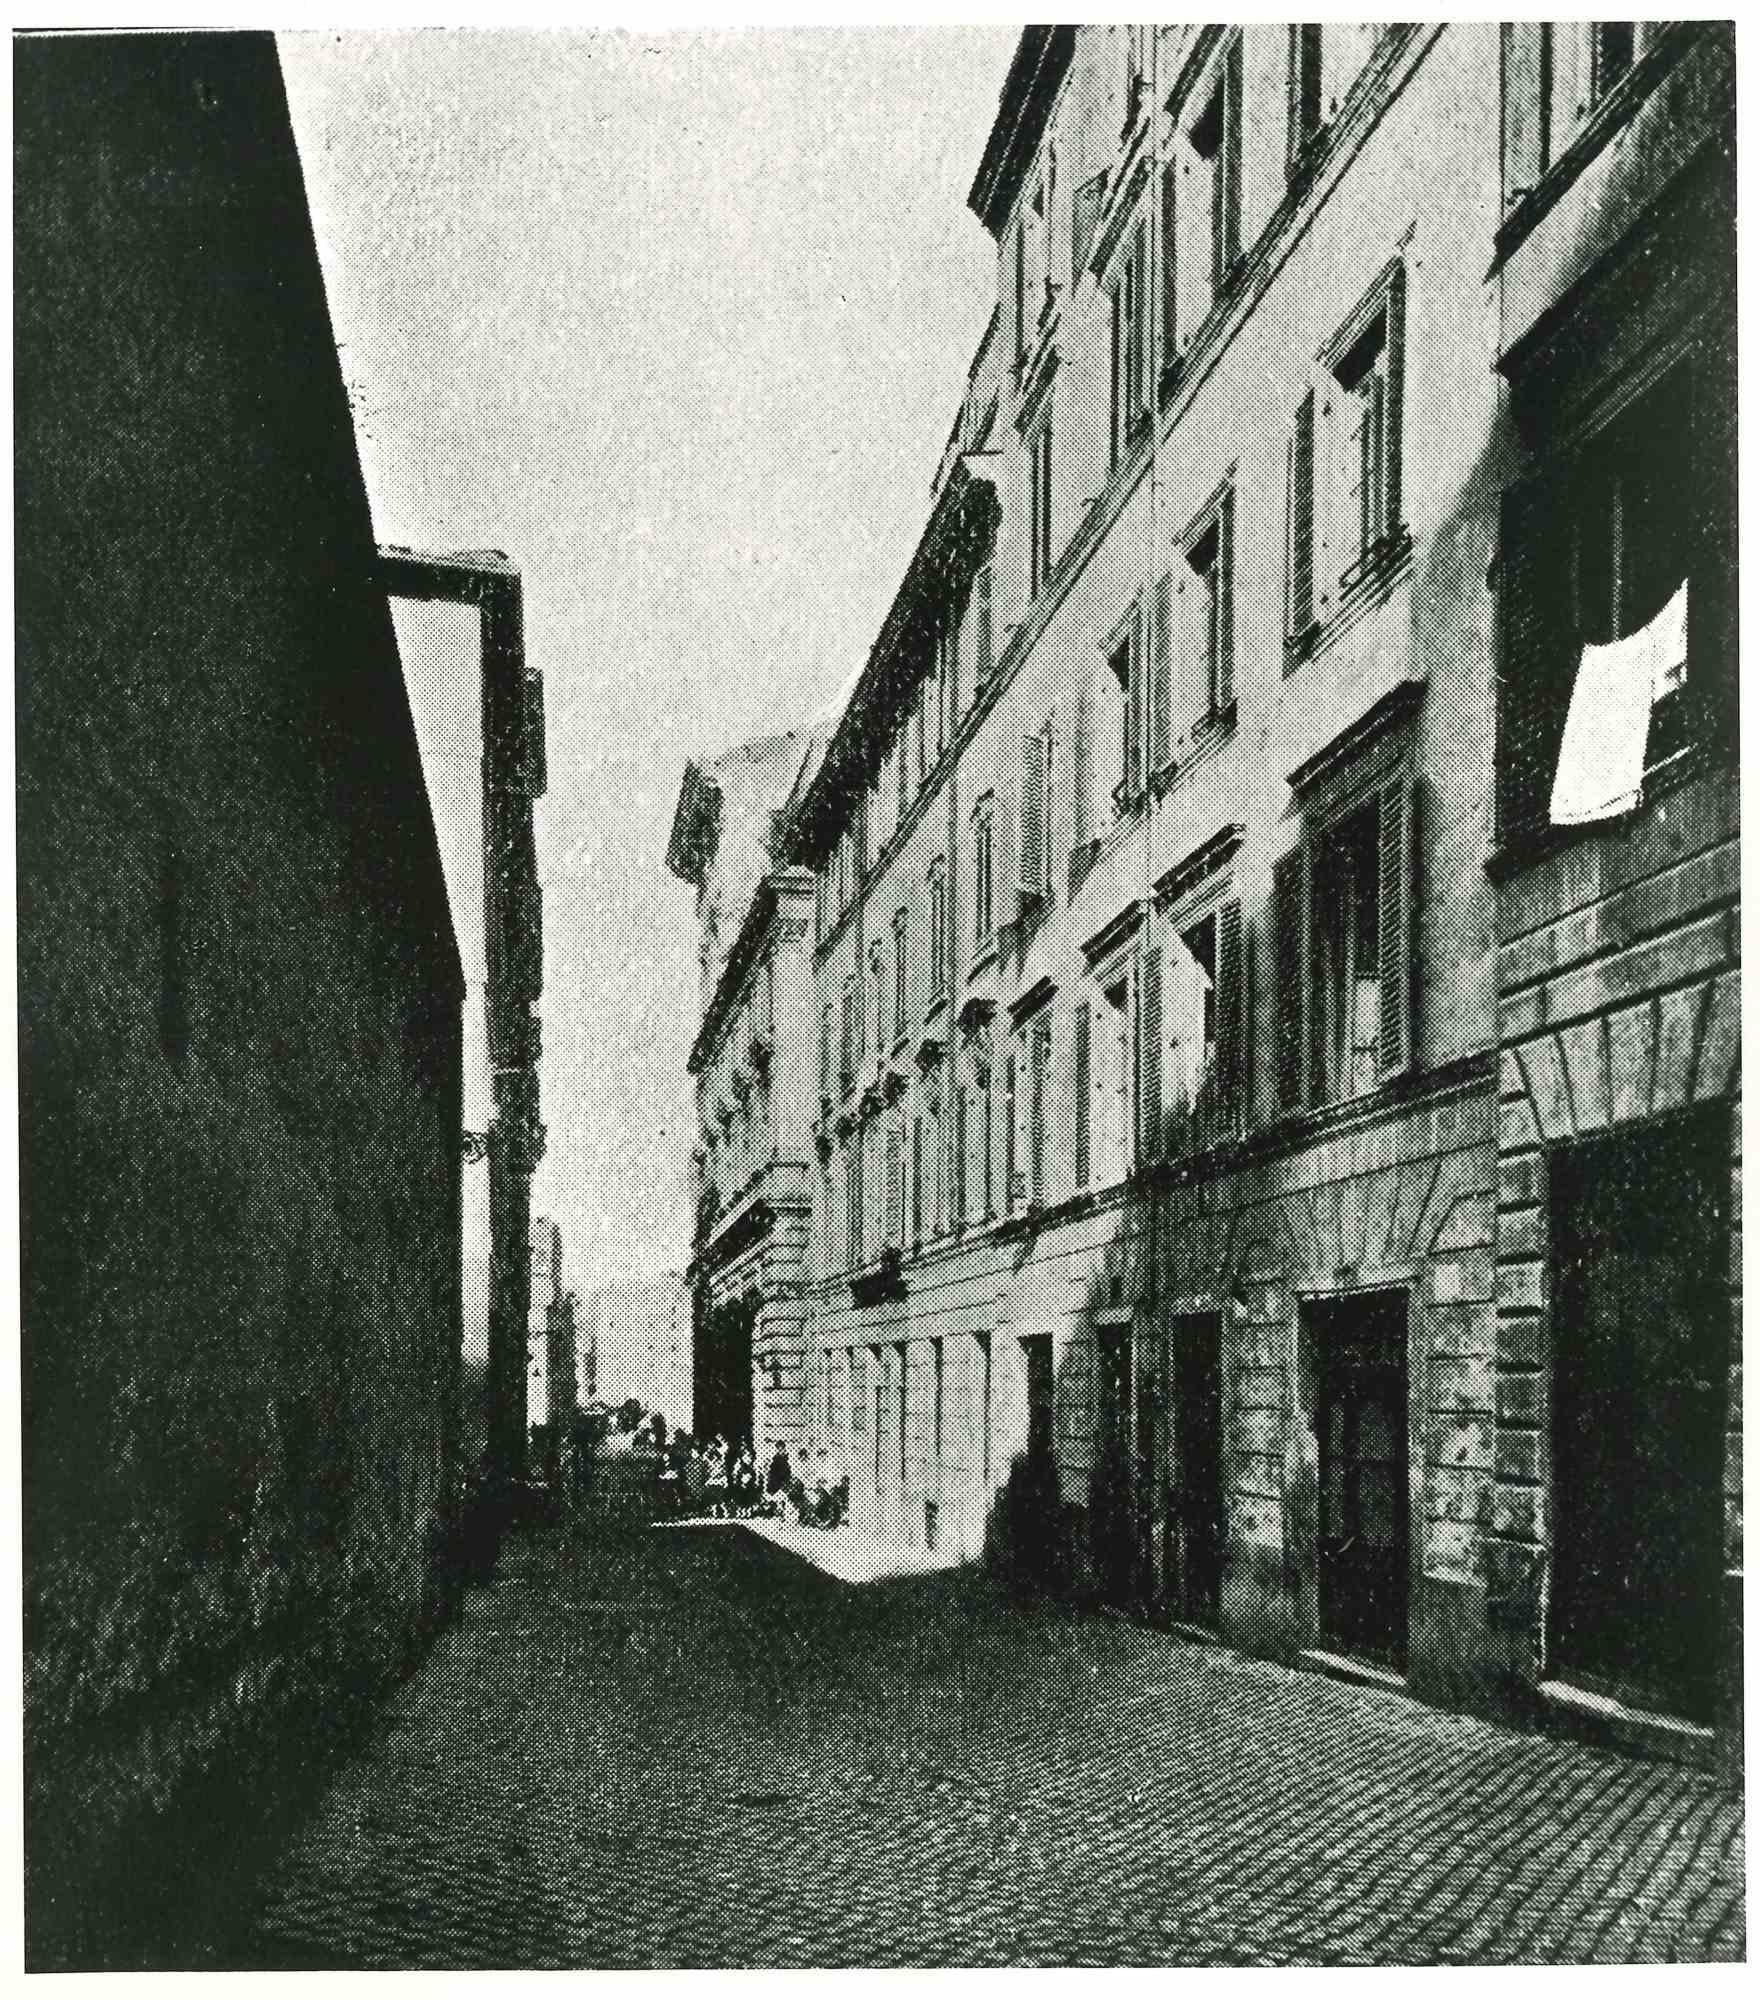 Unknown Black and White Photograph - Rome - Early 20th Century